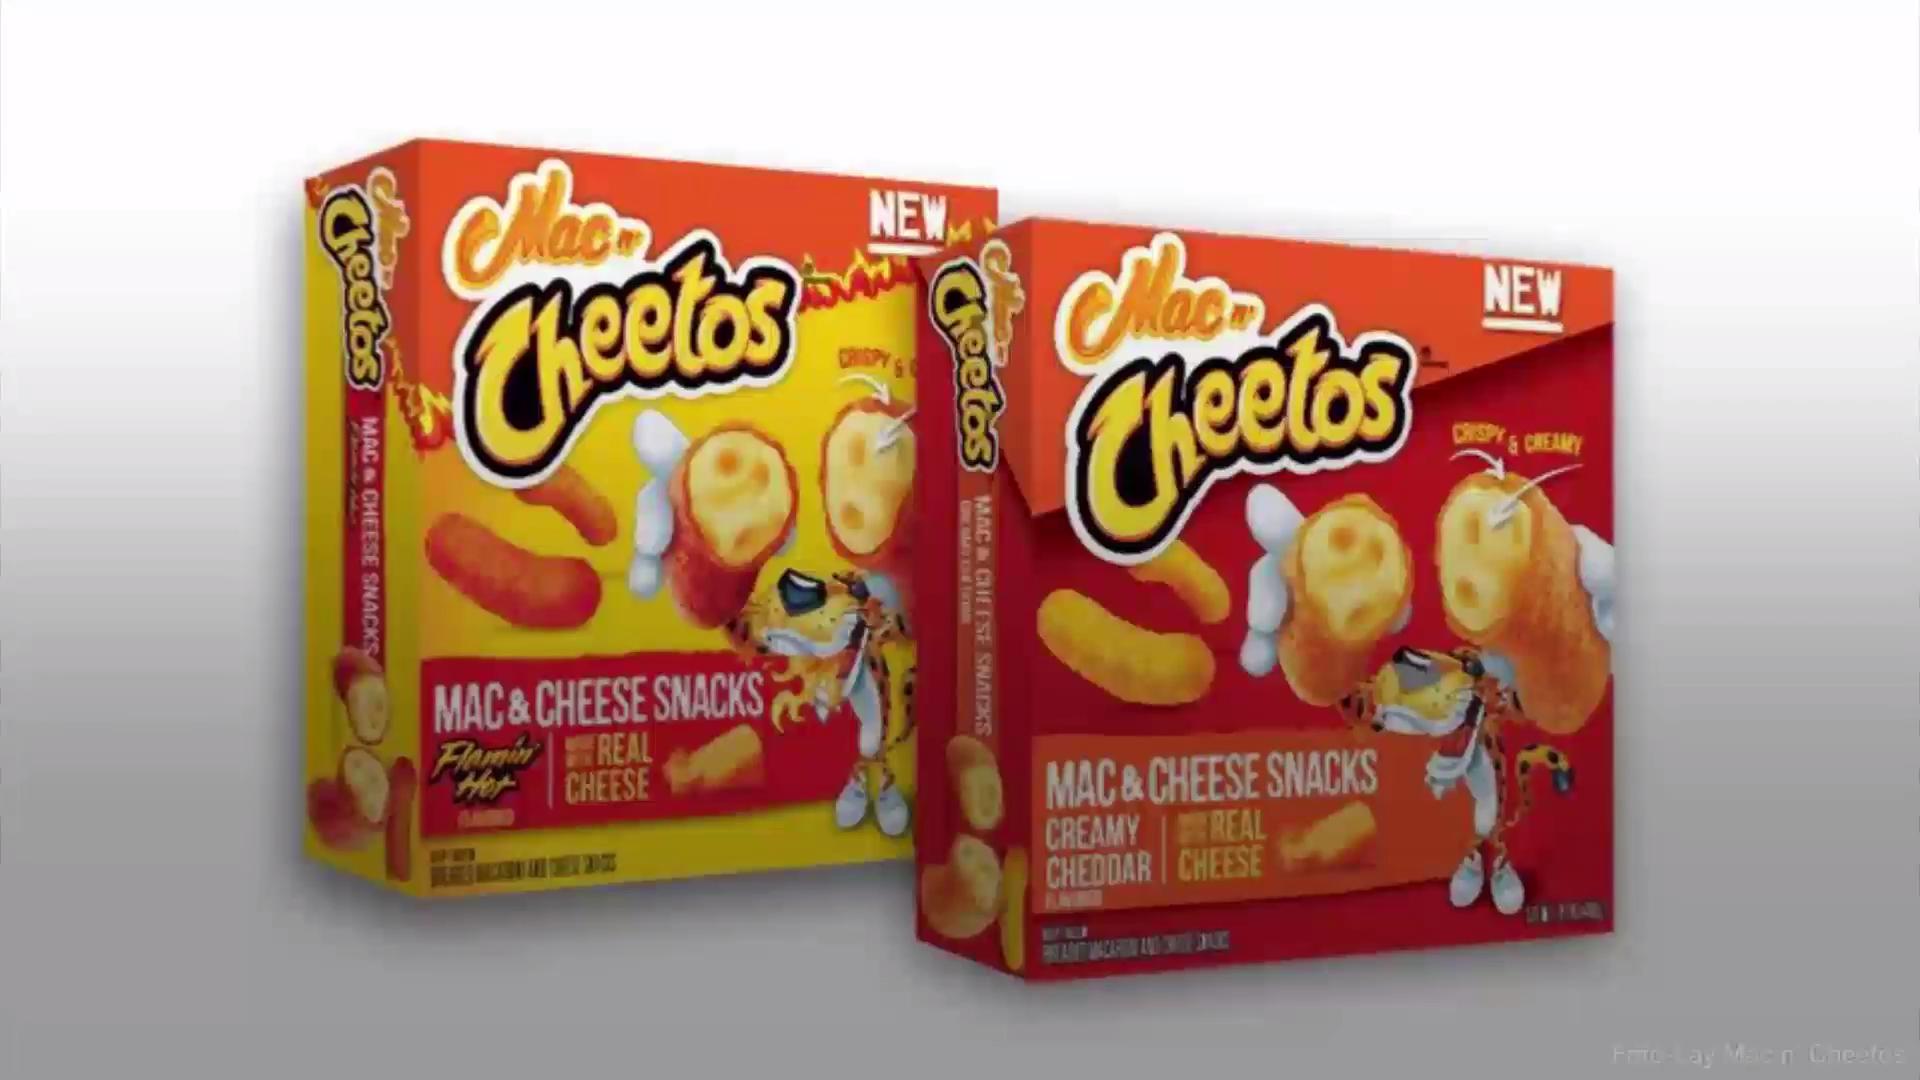 who does the video for the mac n cheetos commercial